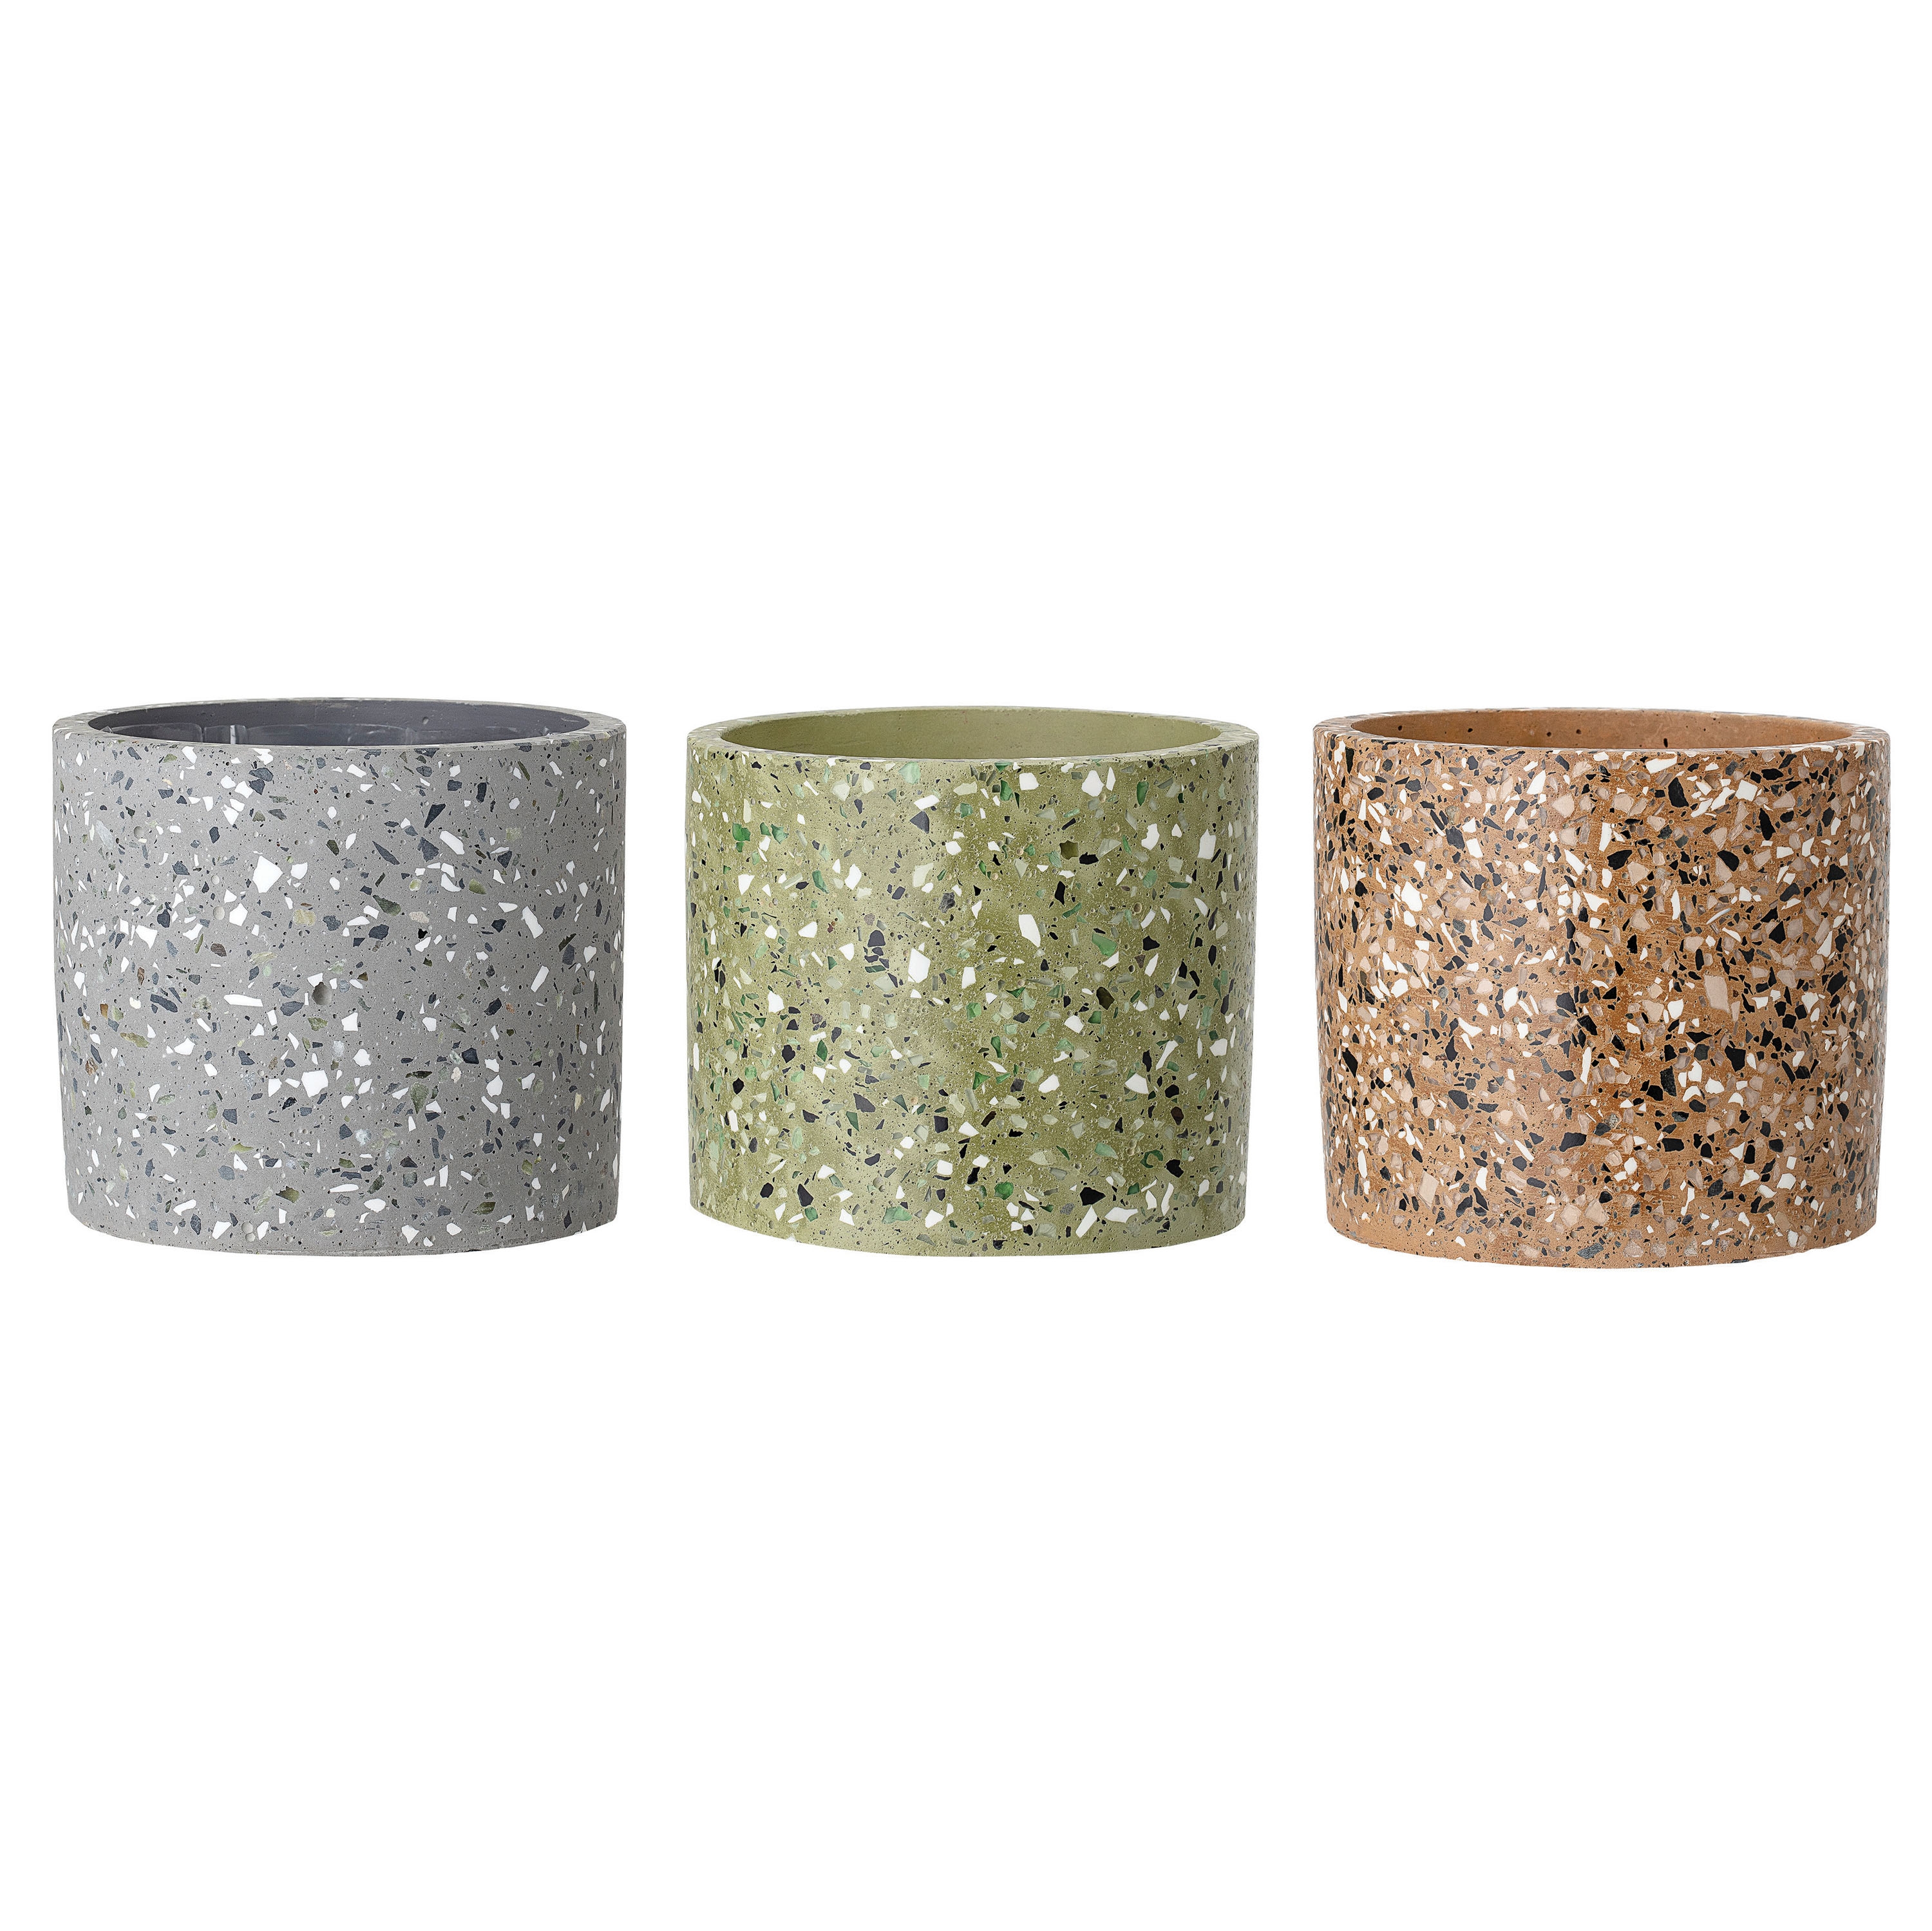 Round Speckled Cement Flower Pot (Set of 3 Colors) - Image 0